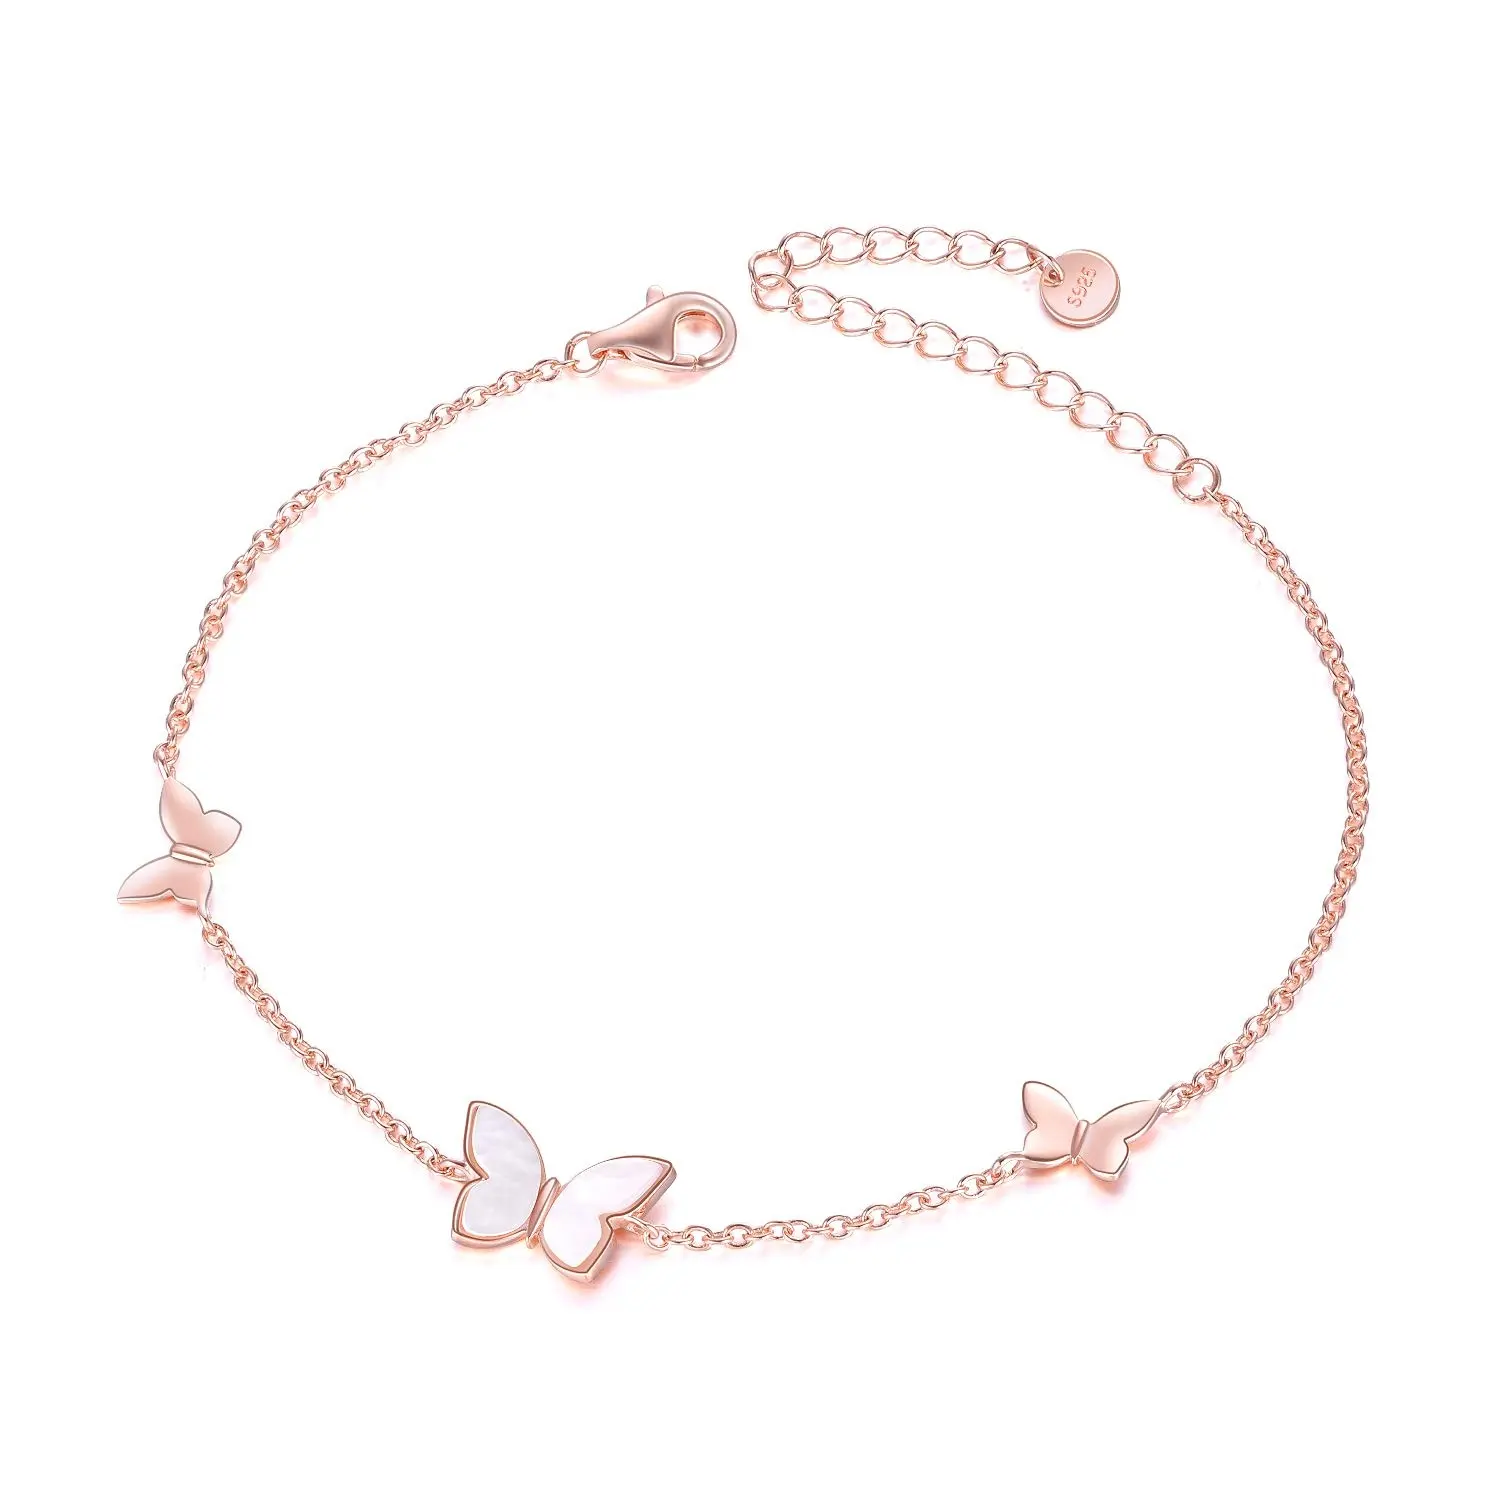 Fashion Sterling Silver 925 Jewelry Gift Rose Gold Pink Butterfly Adjustable Bracelet For Women